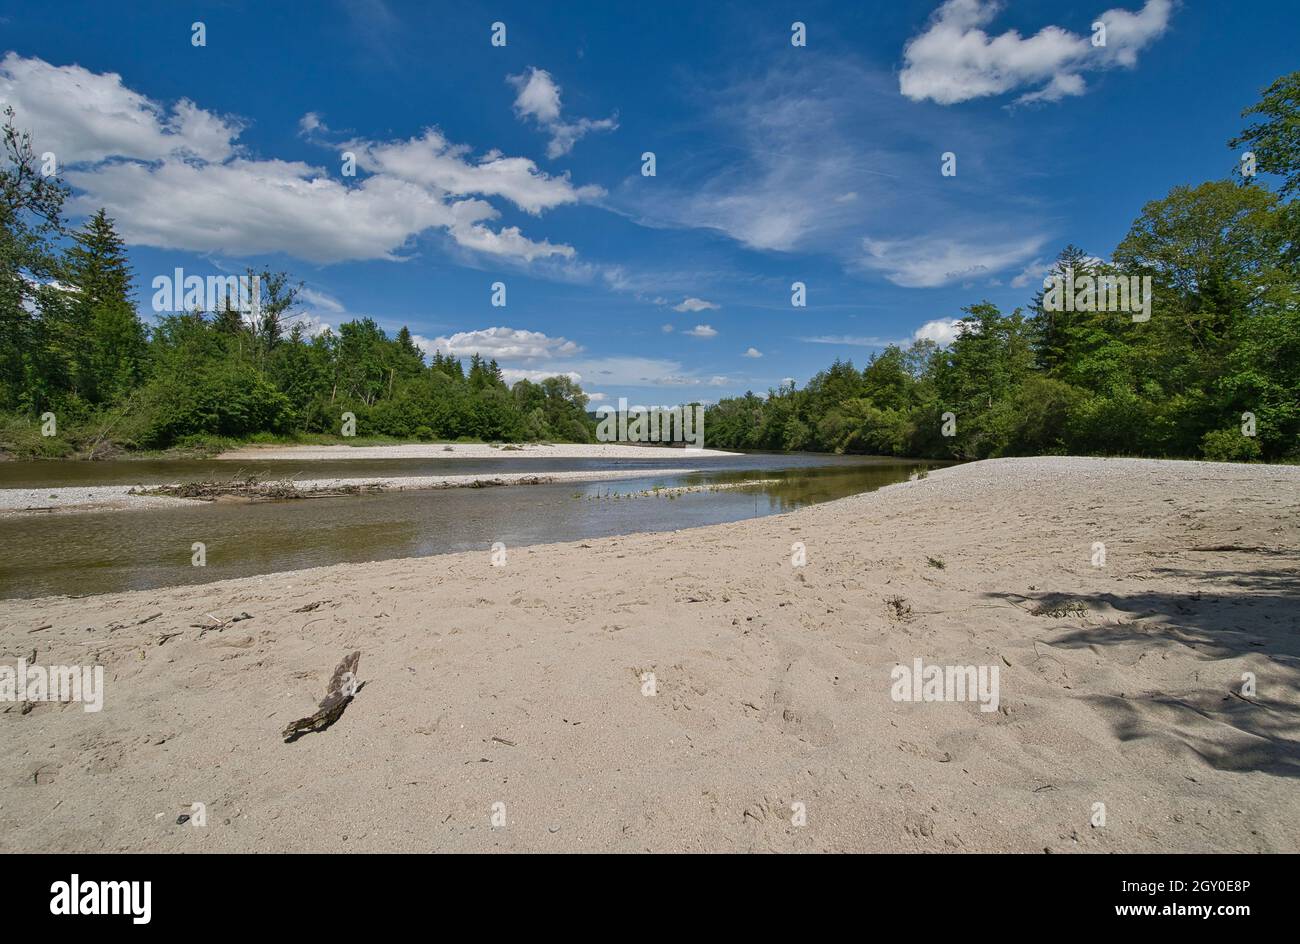 A very beautiful and lonely sandy beach on the Isar river in Bavaria Stock Photo